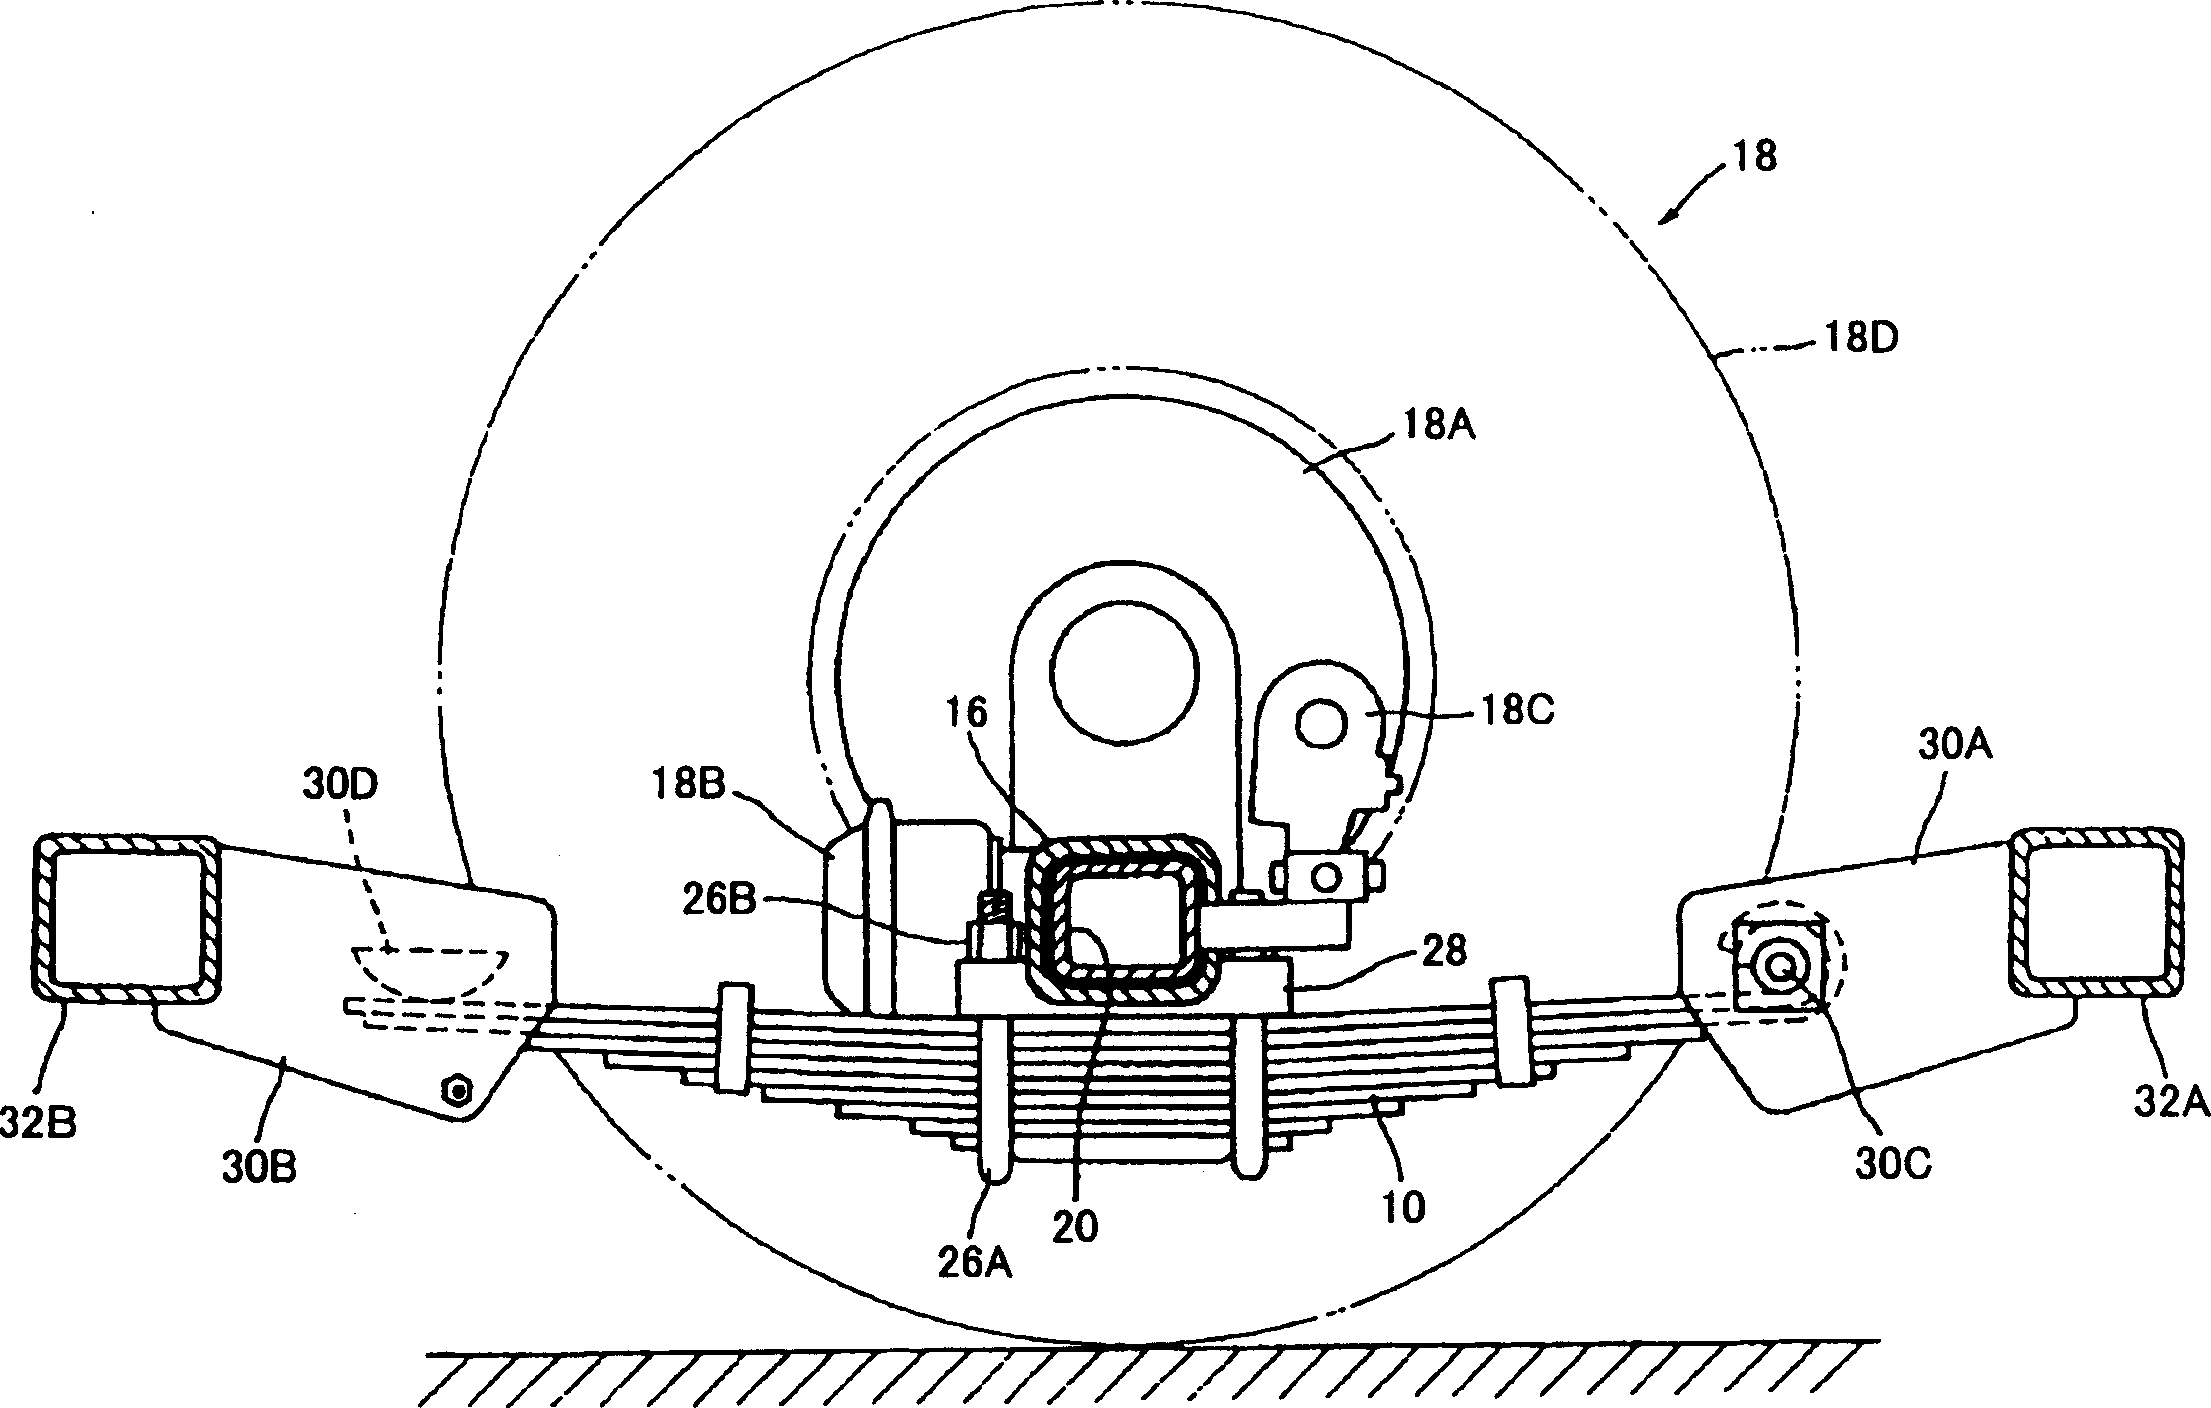 Wheel center distance variable axle of trailer